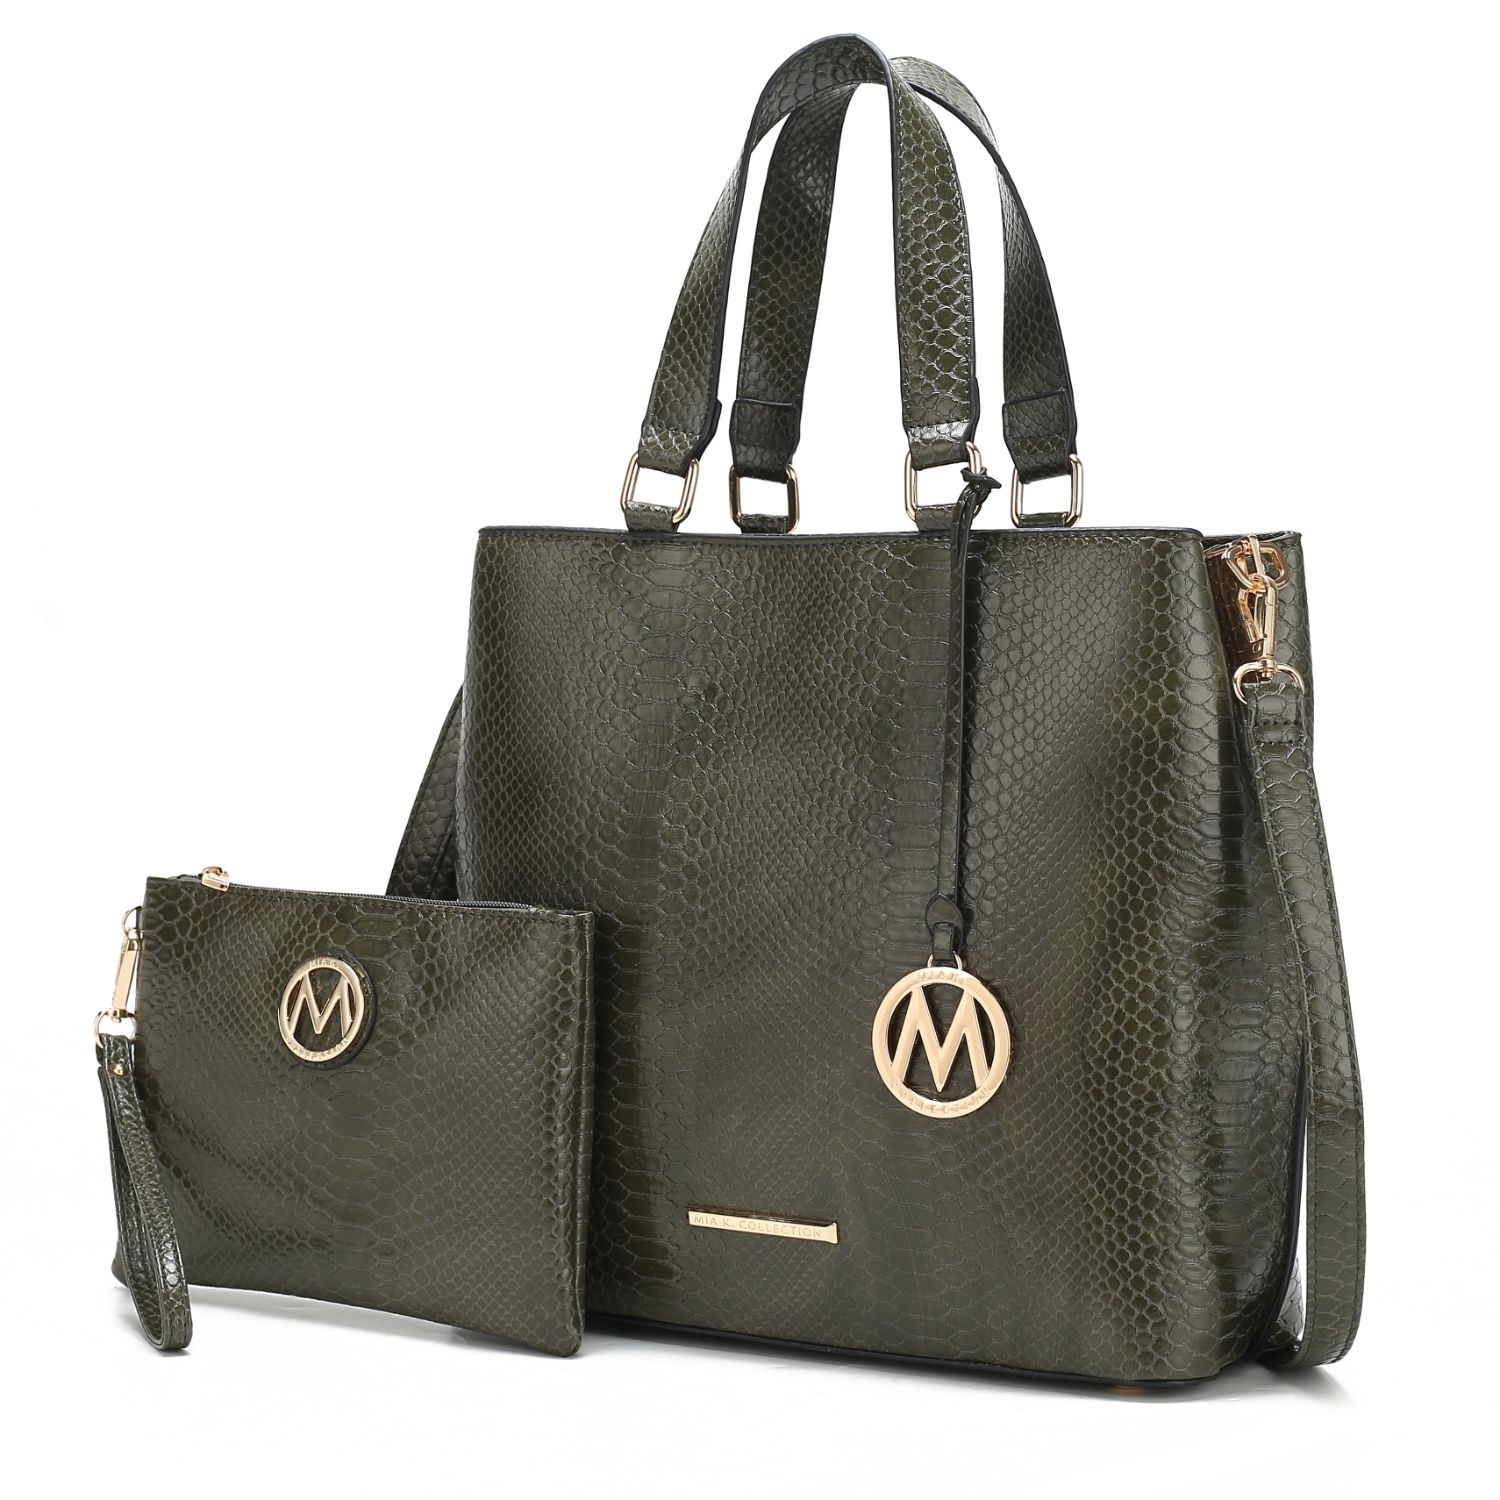 MKF Collection Beryl Snake-embossed Vegan Leather Women's Tote Handbag With Wristlet - 2 Pieces, By Mia K - Seafoam